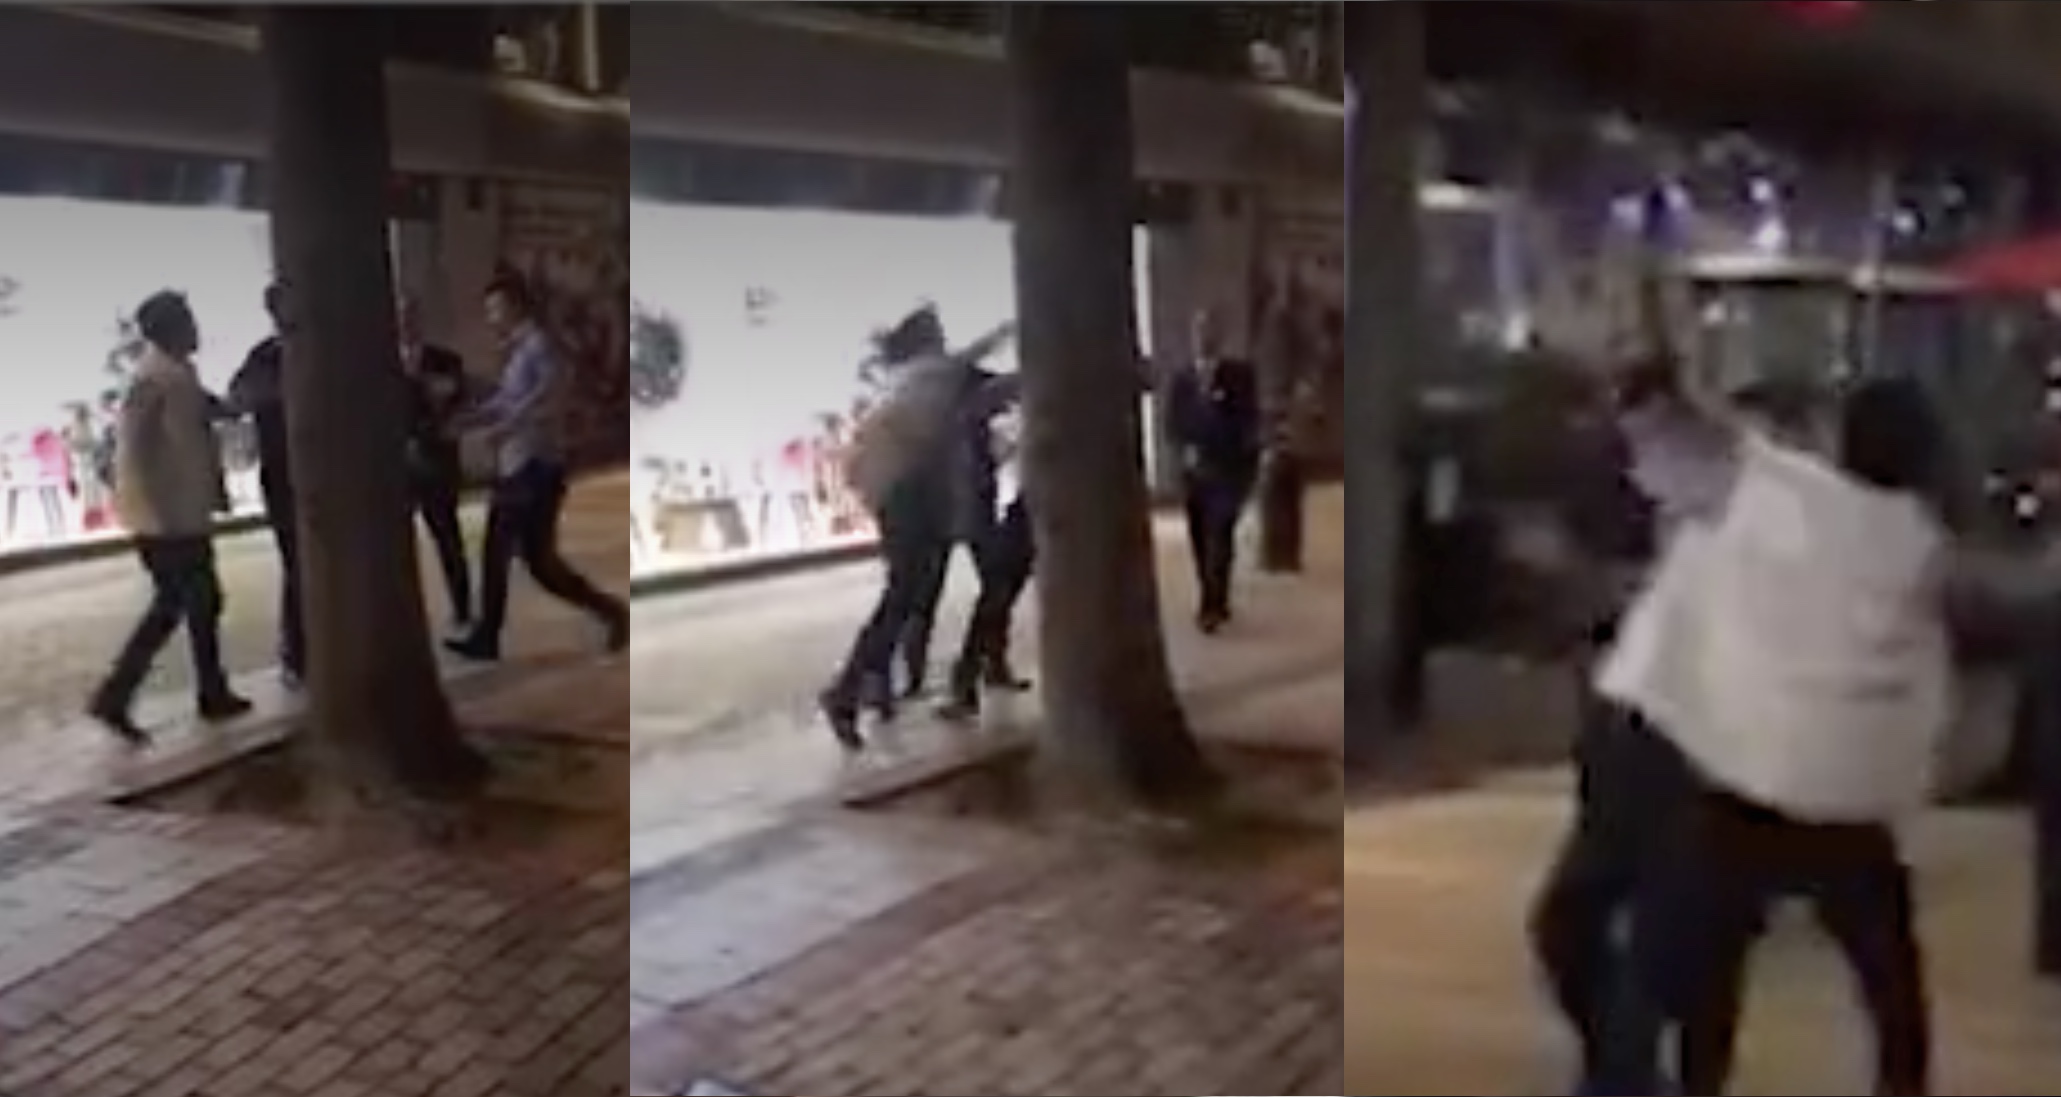 Scenes of the fight in video published by Apple Daily.